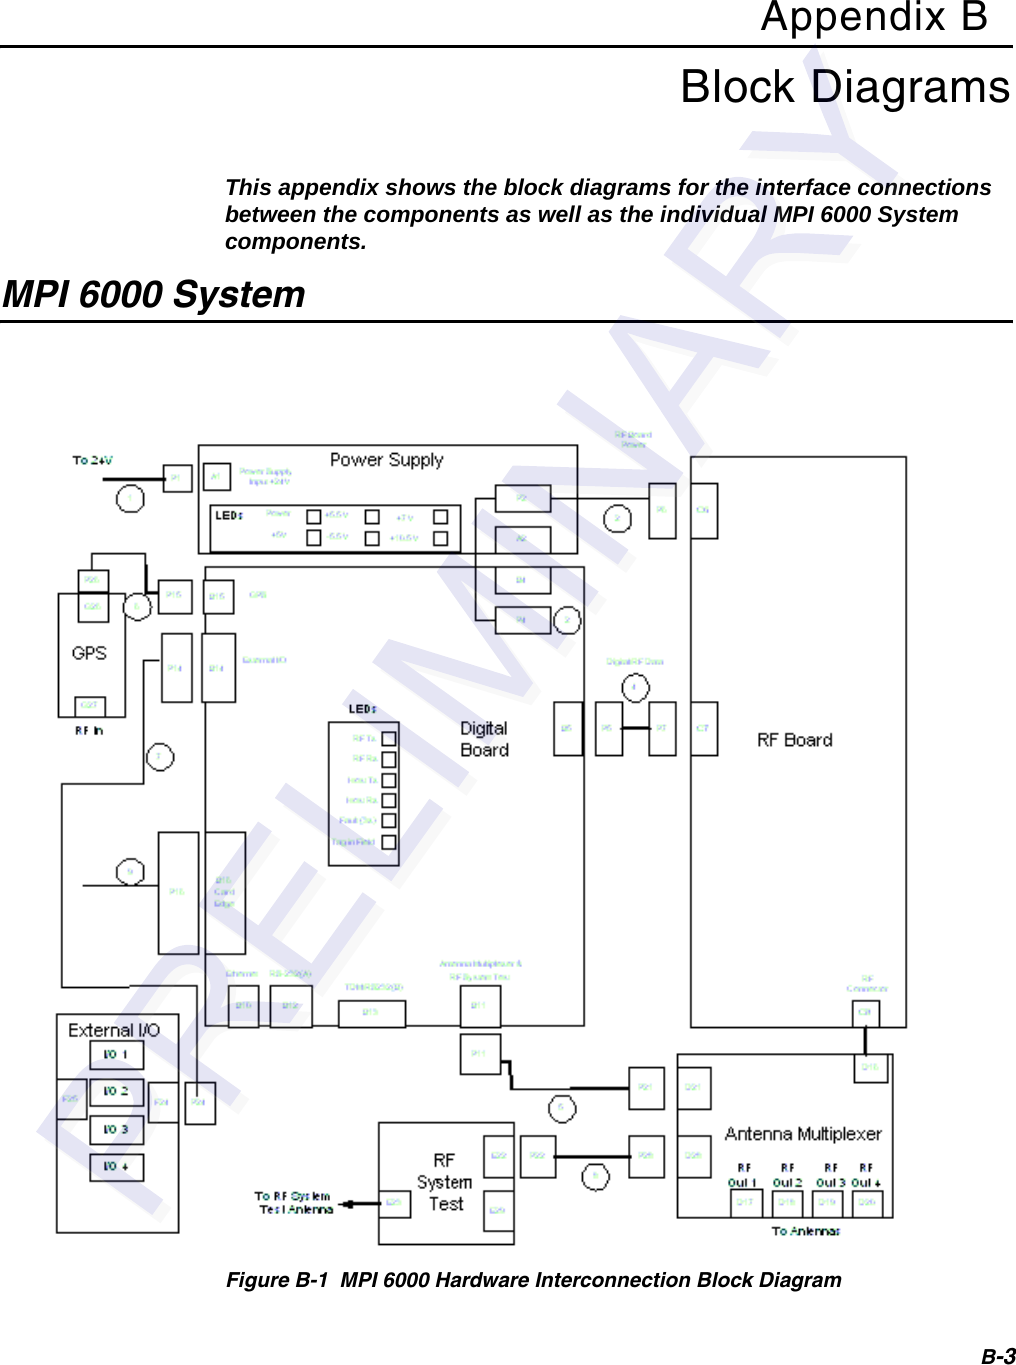 B-3Appendix BBlock DiagramsThis appendix shows the block diagrams for the interface connections between the components as well as the individual MPI 6000 System components.MPI 6000 SystemFigure B-1  MPI 6000 Hardware Interconnection Block Diagram